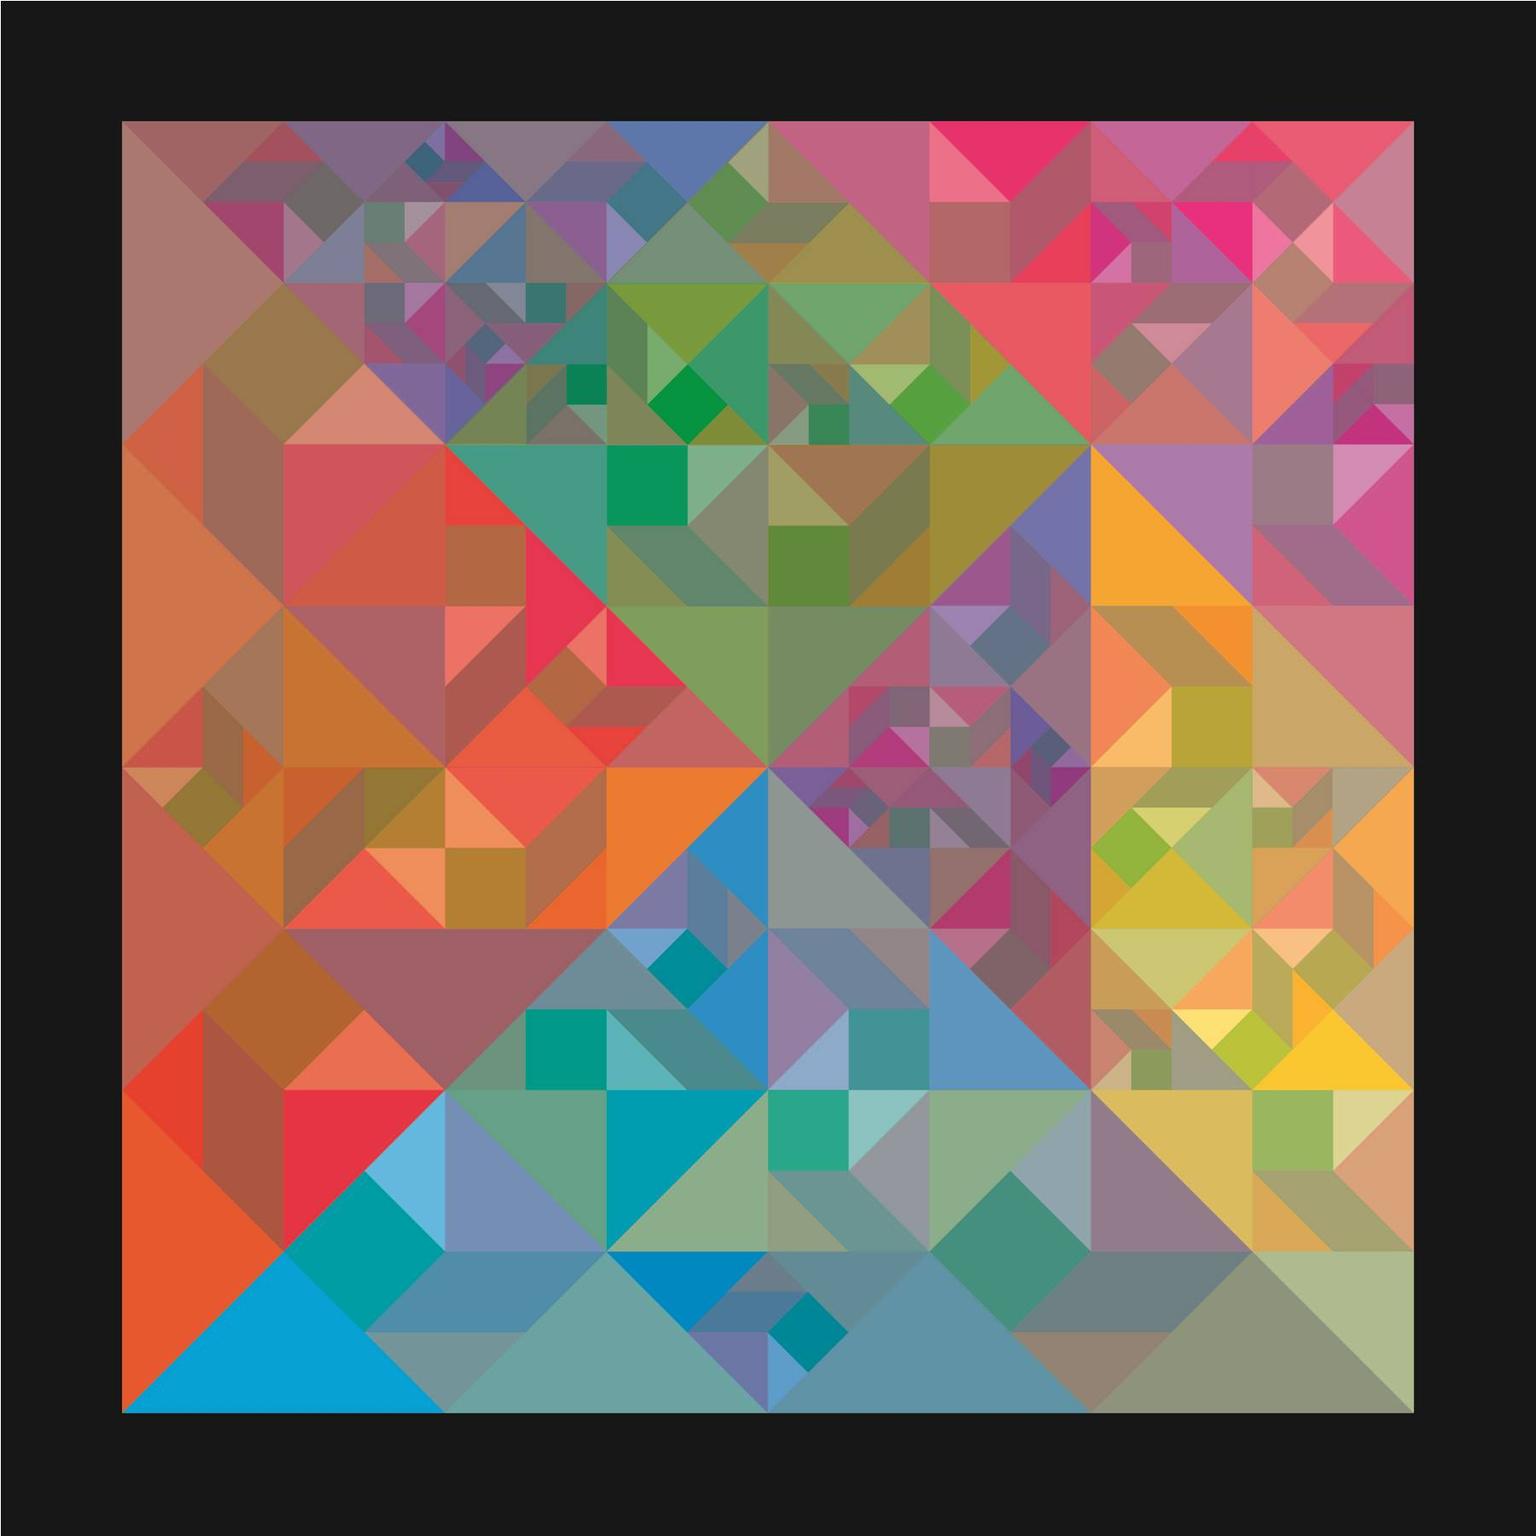 Image for entry 'Recursive Colored Tangram (3 Levels)'